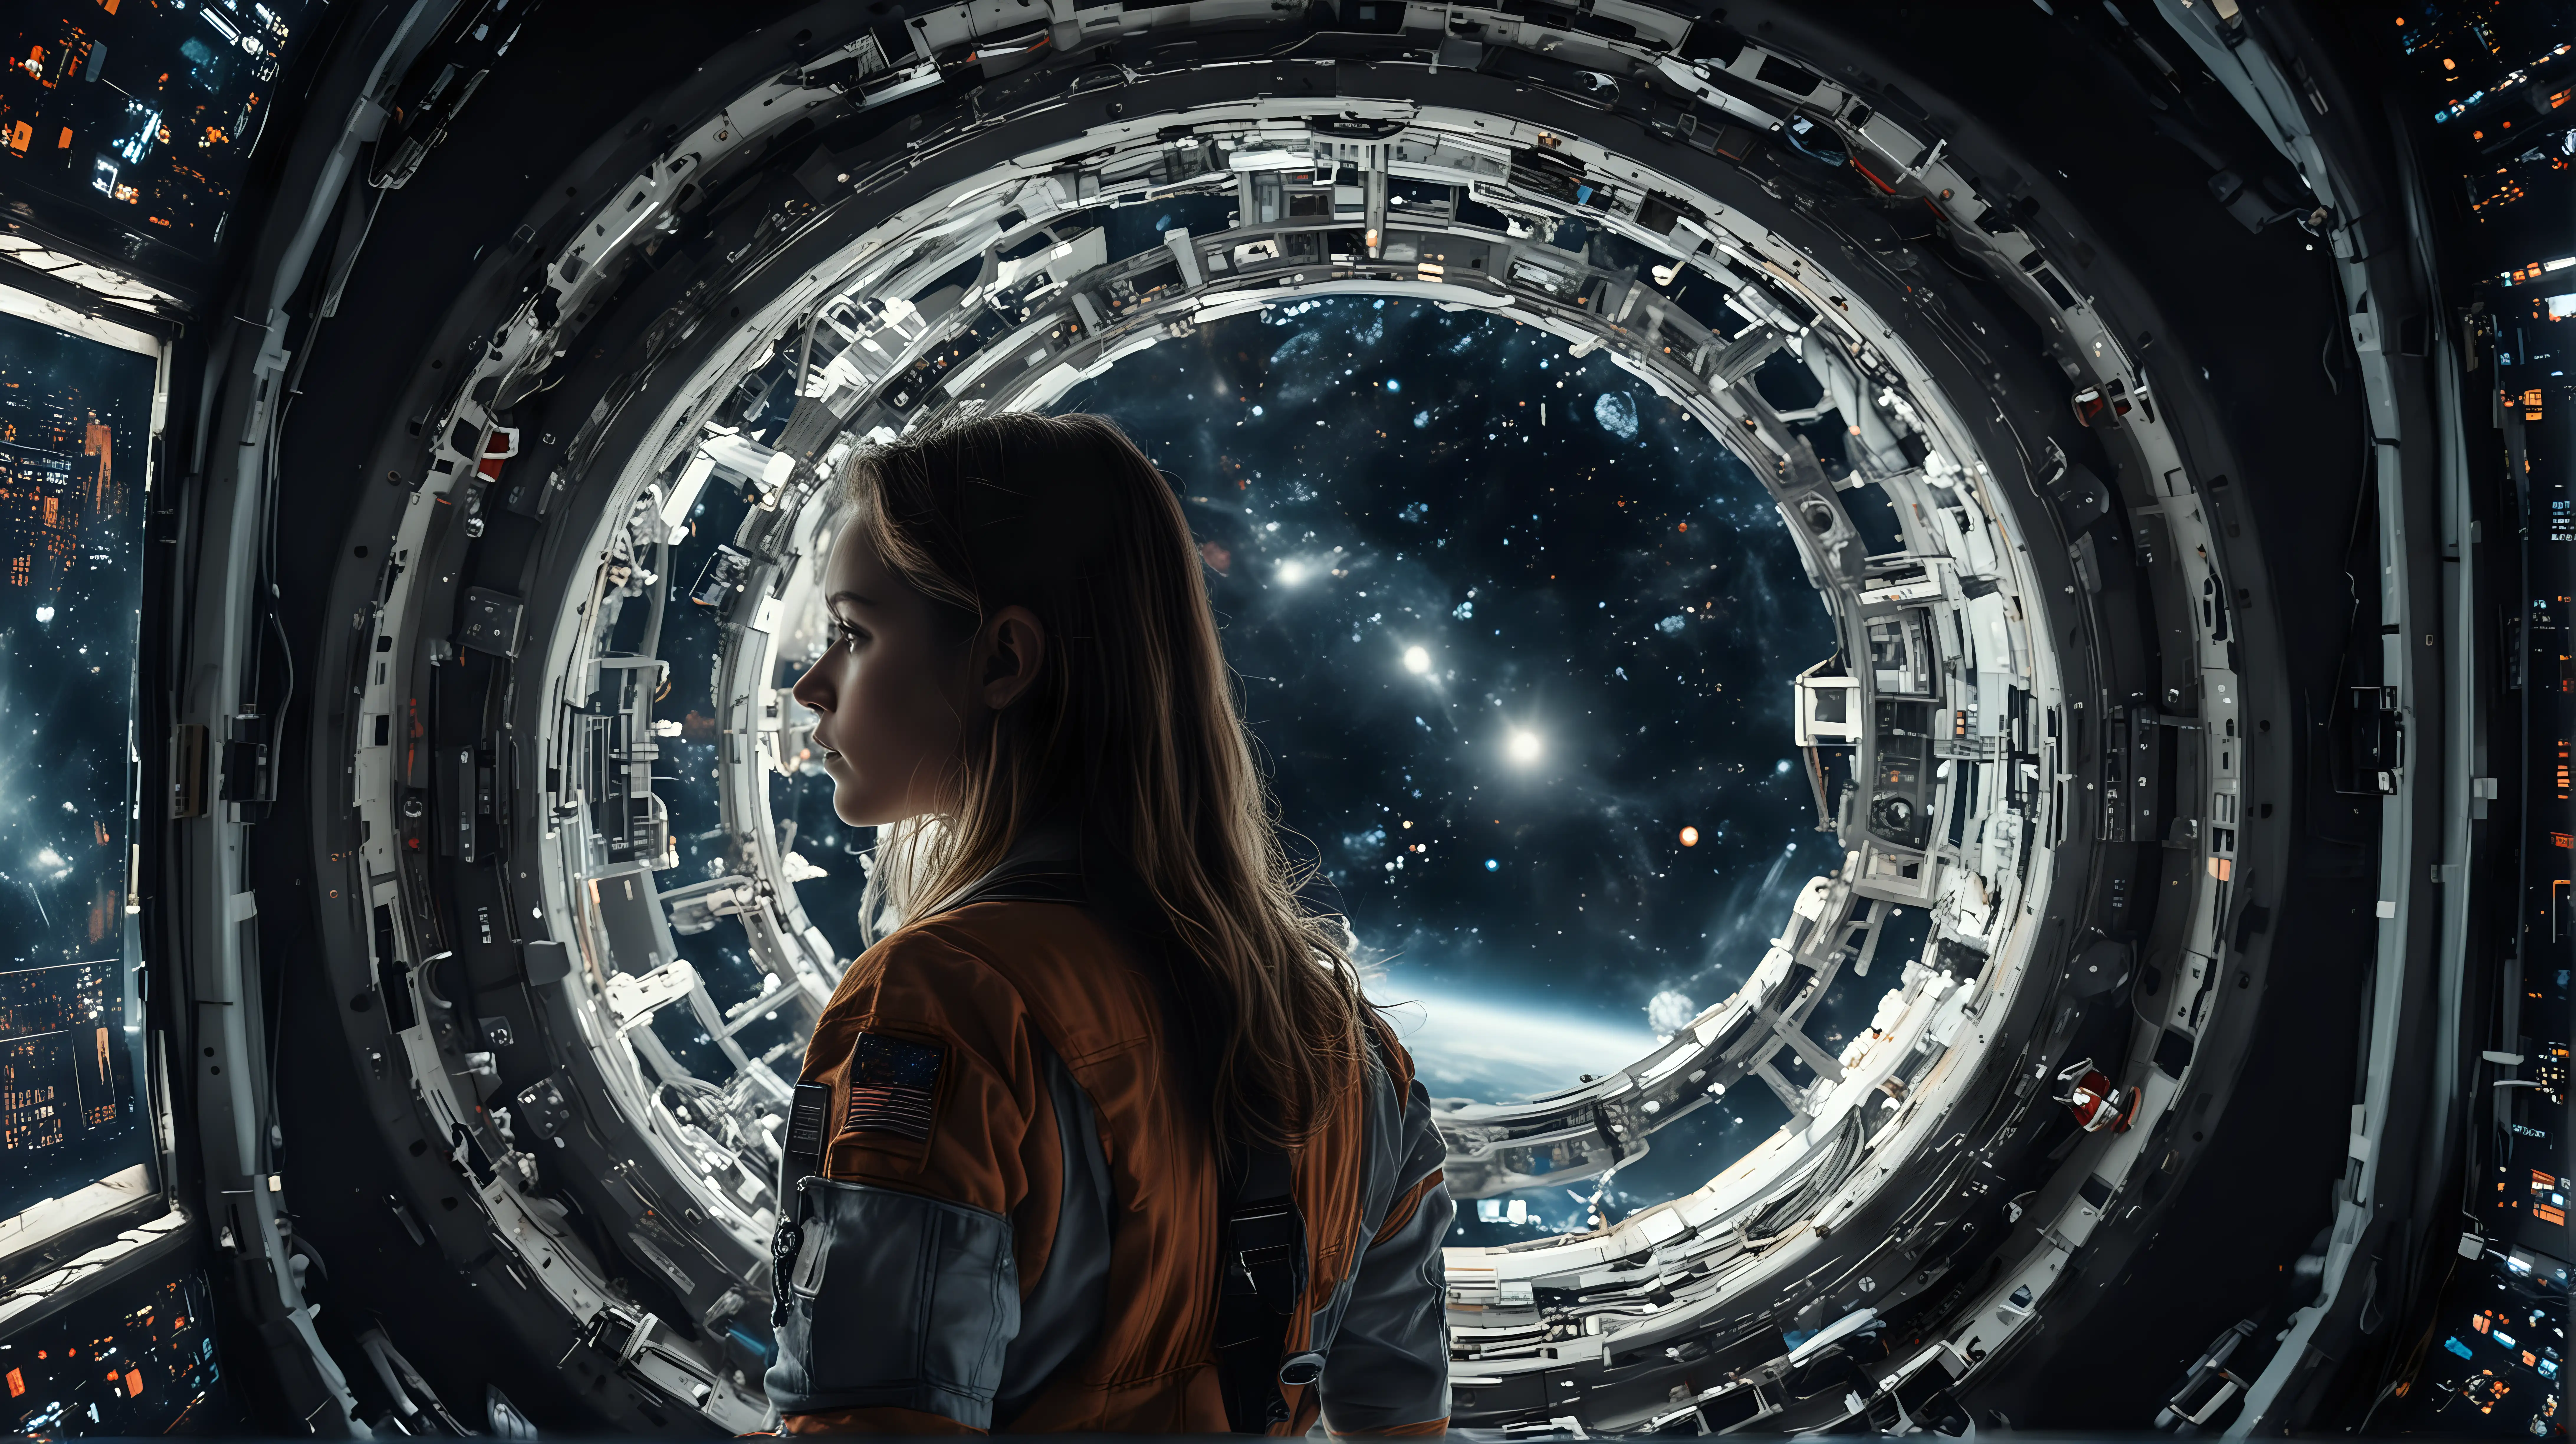 Young Woman Astronaut Observing Galaxies in Interstellar Spaceship Control Room